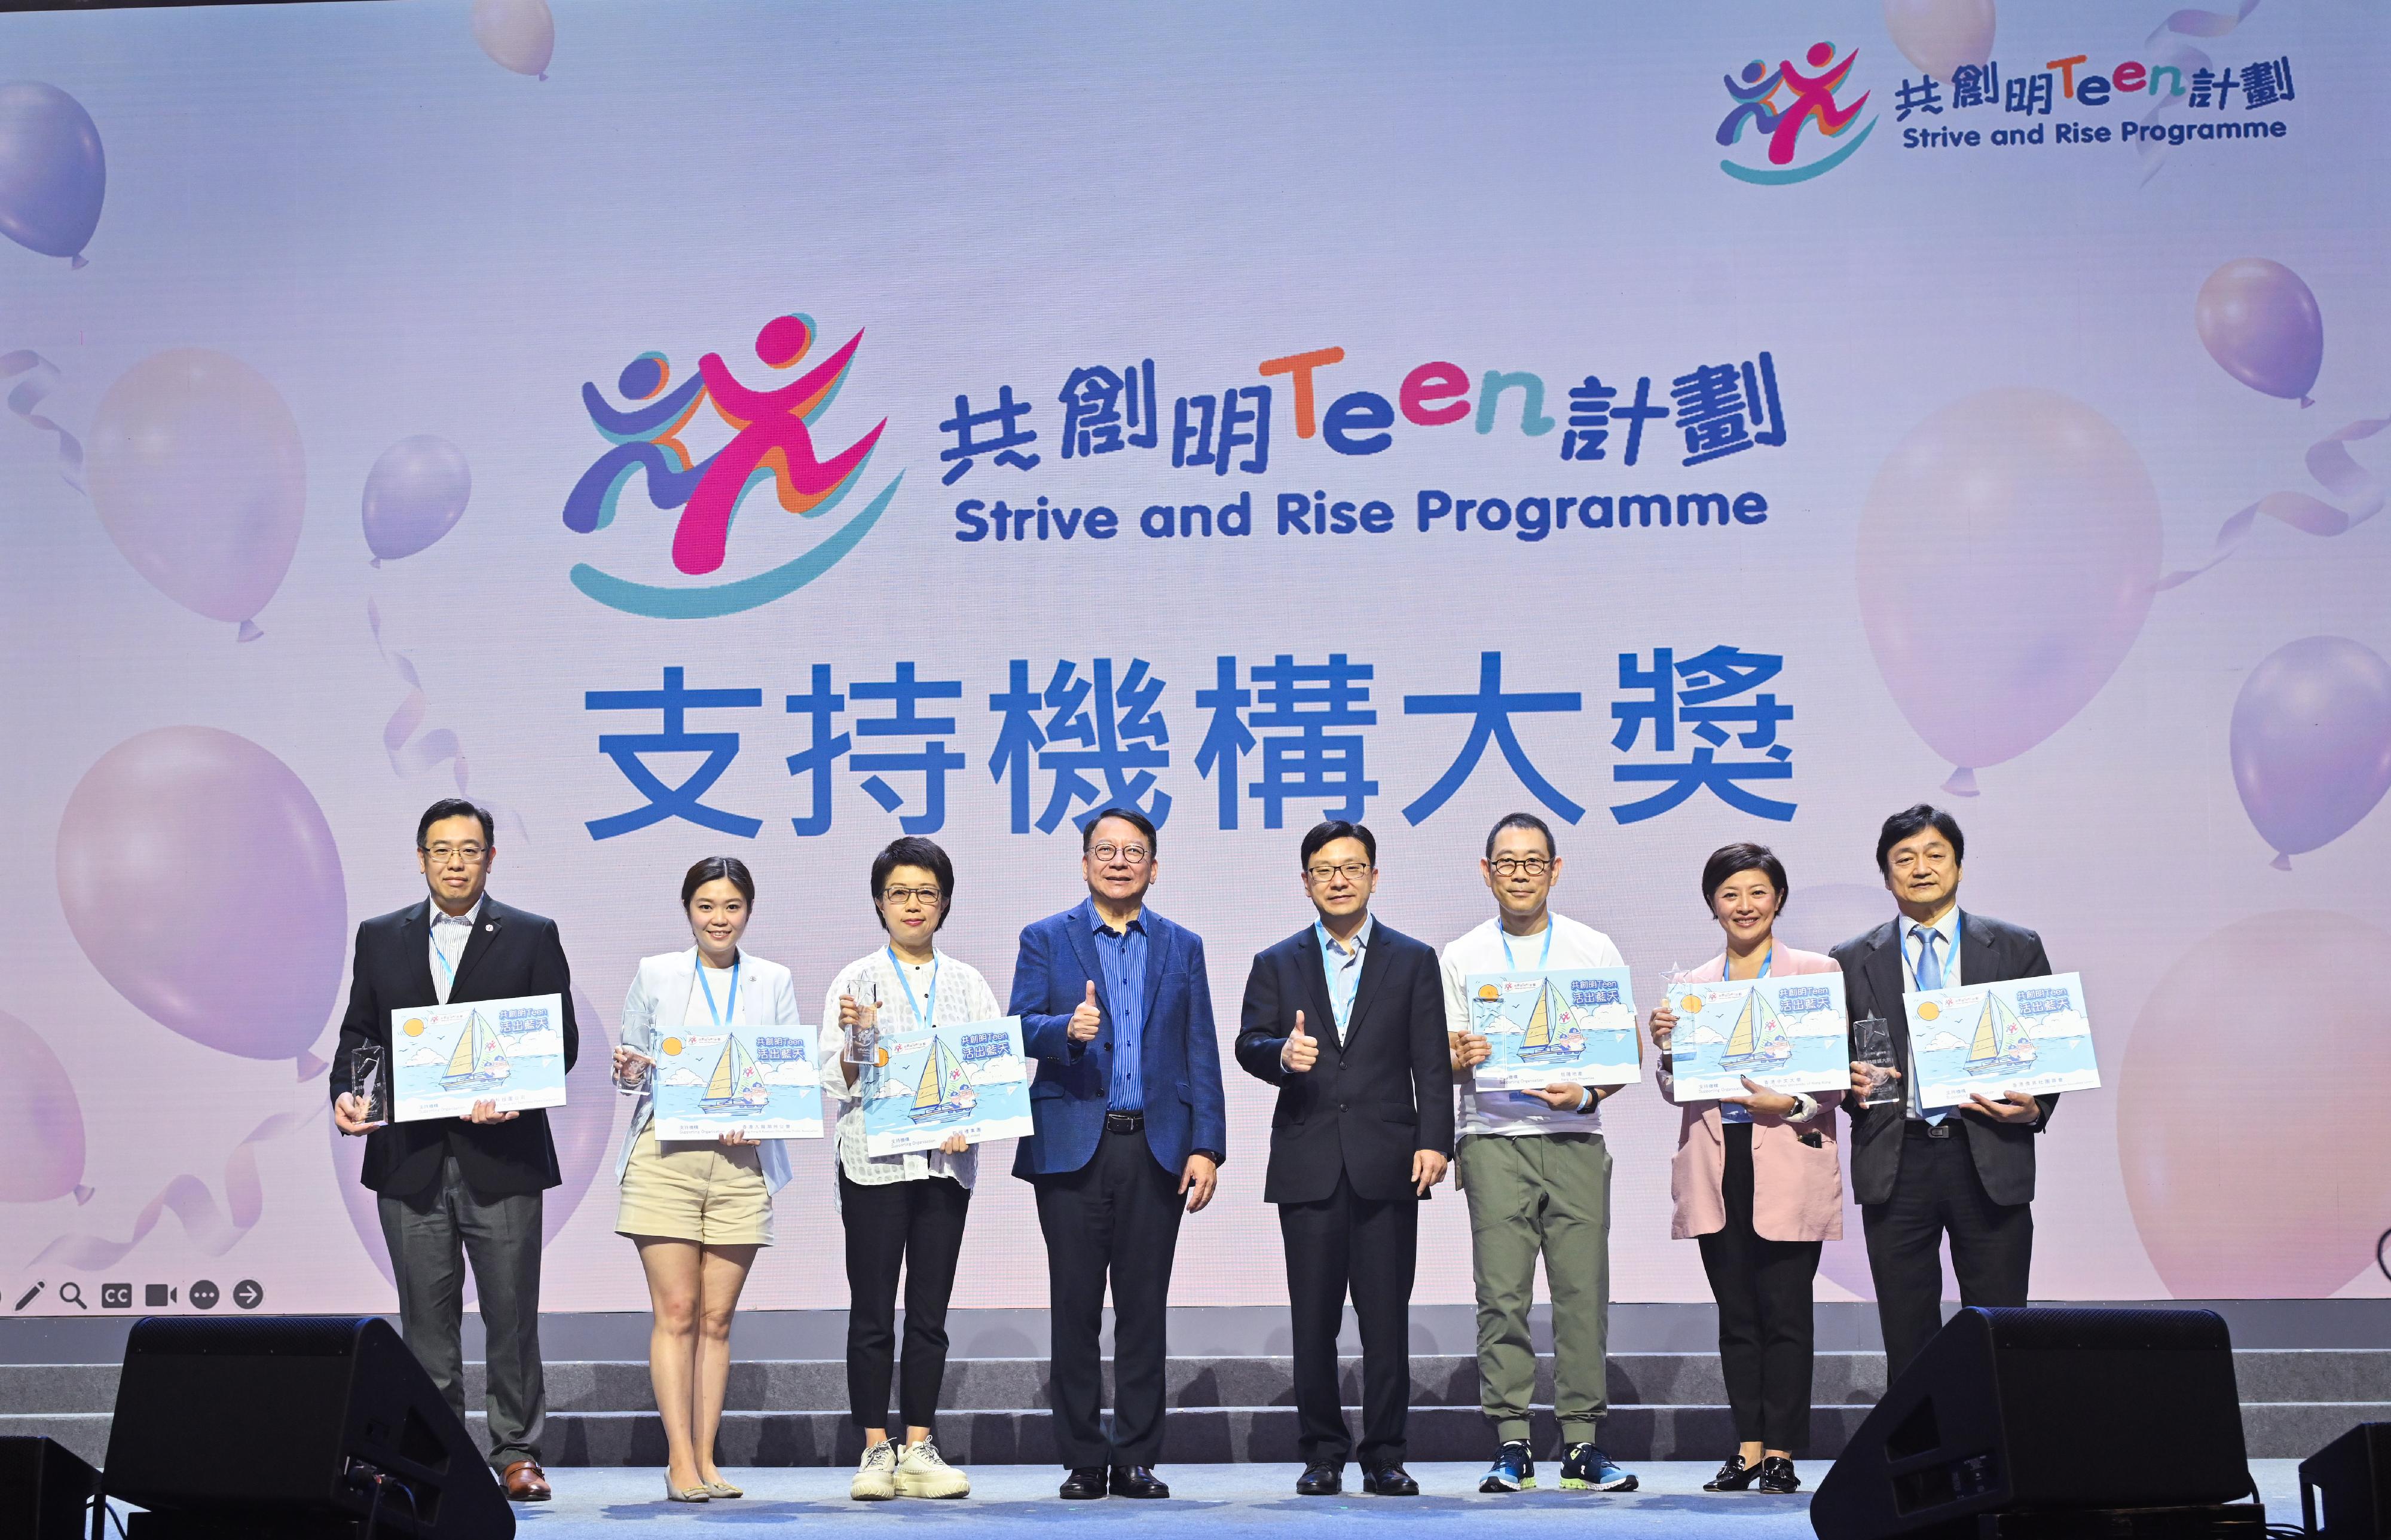 The Chief Secretary for Administration, Mr Chan Kwok-ki, attended the Graduation Ceremony of the Strive and Rise Programme today (November 4). Photo shows Mr Chan (fourth left) and the Secretary for Labour and Welfare, Mr Chris Sun (fourth right), with representatives of supporting organisations.
